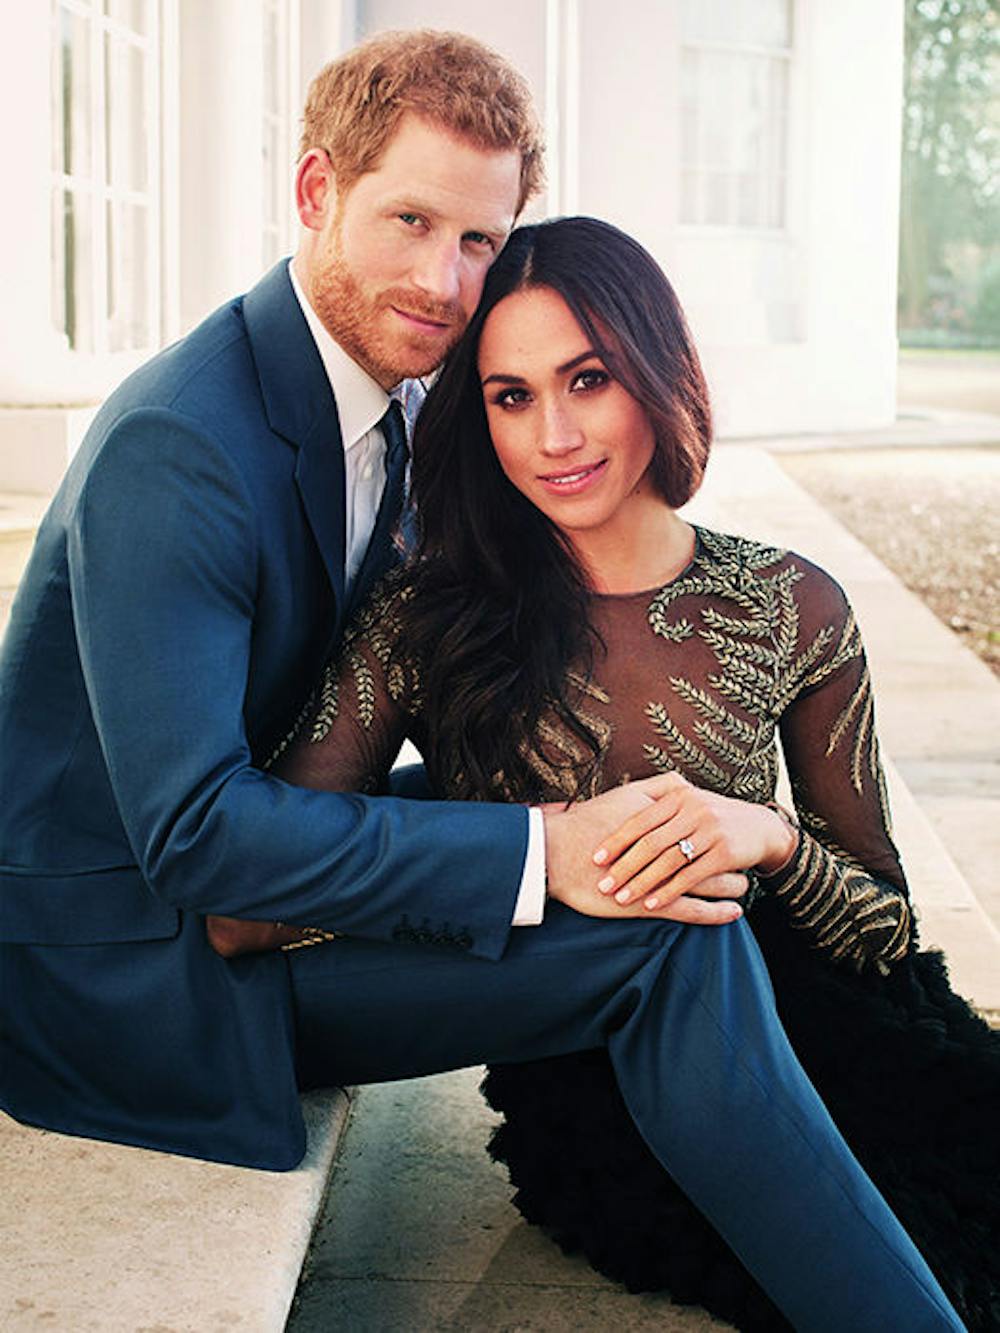 <p><span id="docs-internal-guid-358a066c-d14c-aab3-75fa-2e5696979412"><span>Prince Harry and Meghan Markle pose for an official engagement photo at Frogmore House, in Windsor, England.</span></span></p>